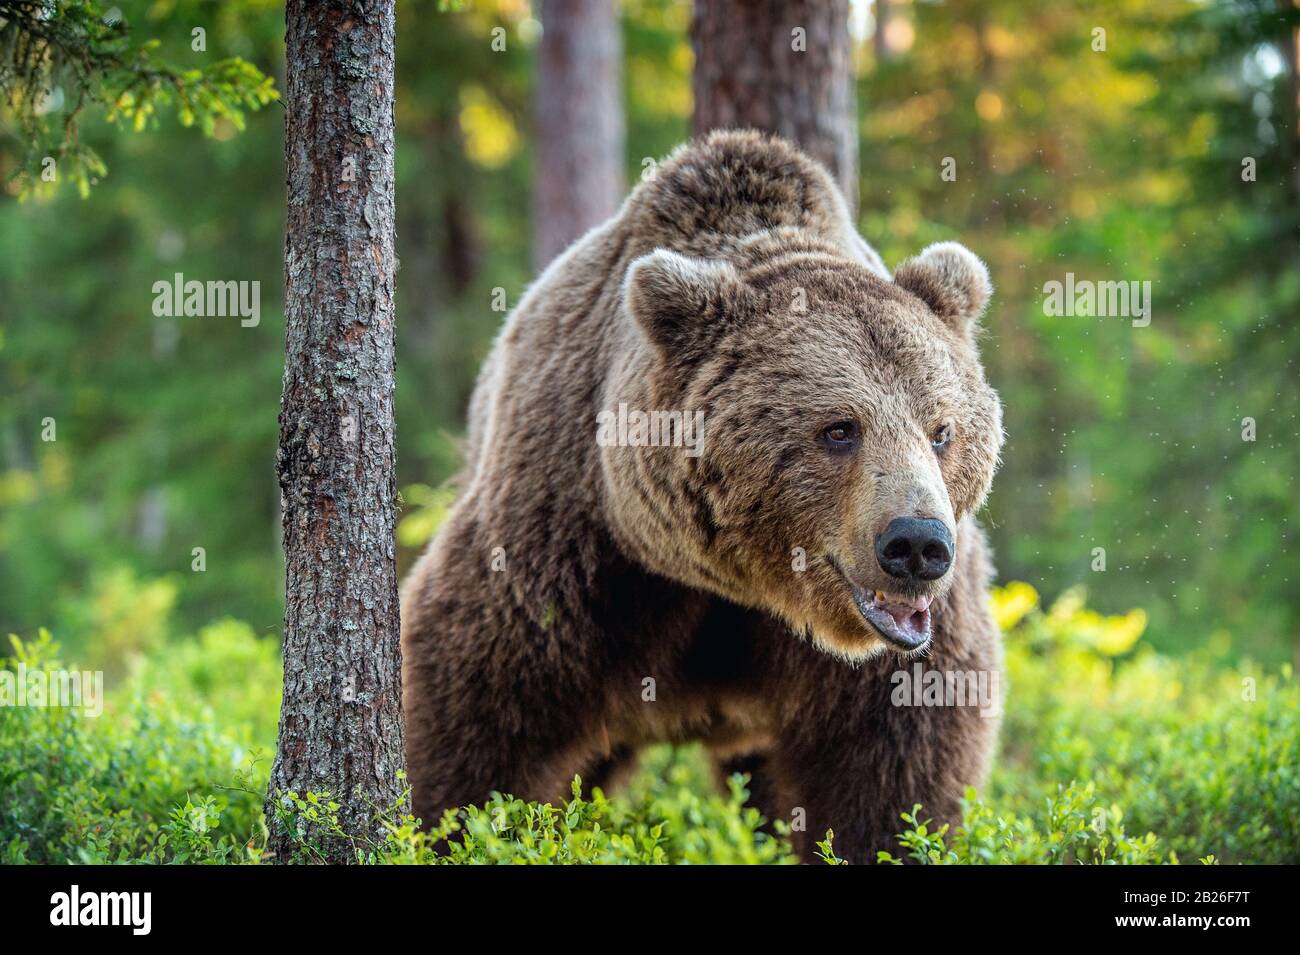 Wild Adult Male of Brown bear in the pine forest. Front view. Scientific name: Ursus arctos. Summer season. Natural habitat. Stock Photo